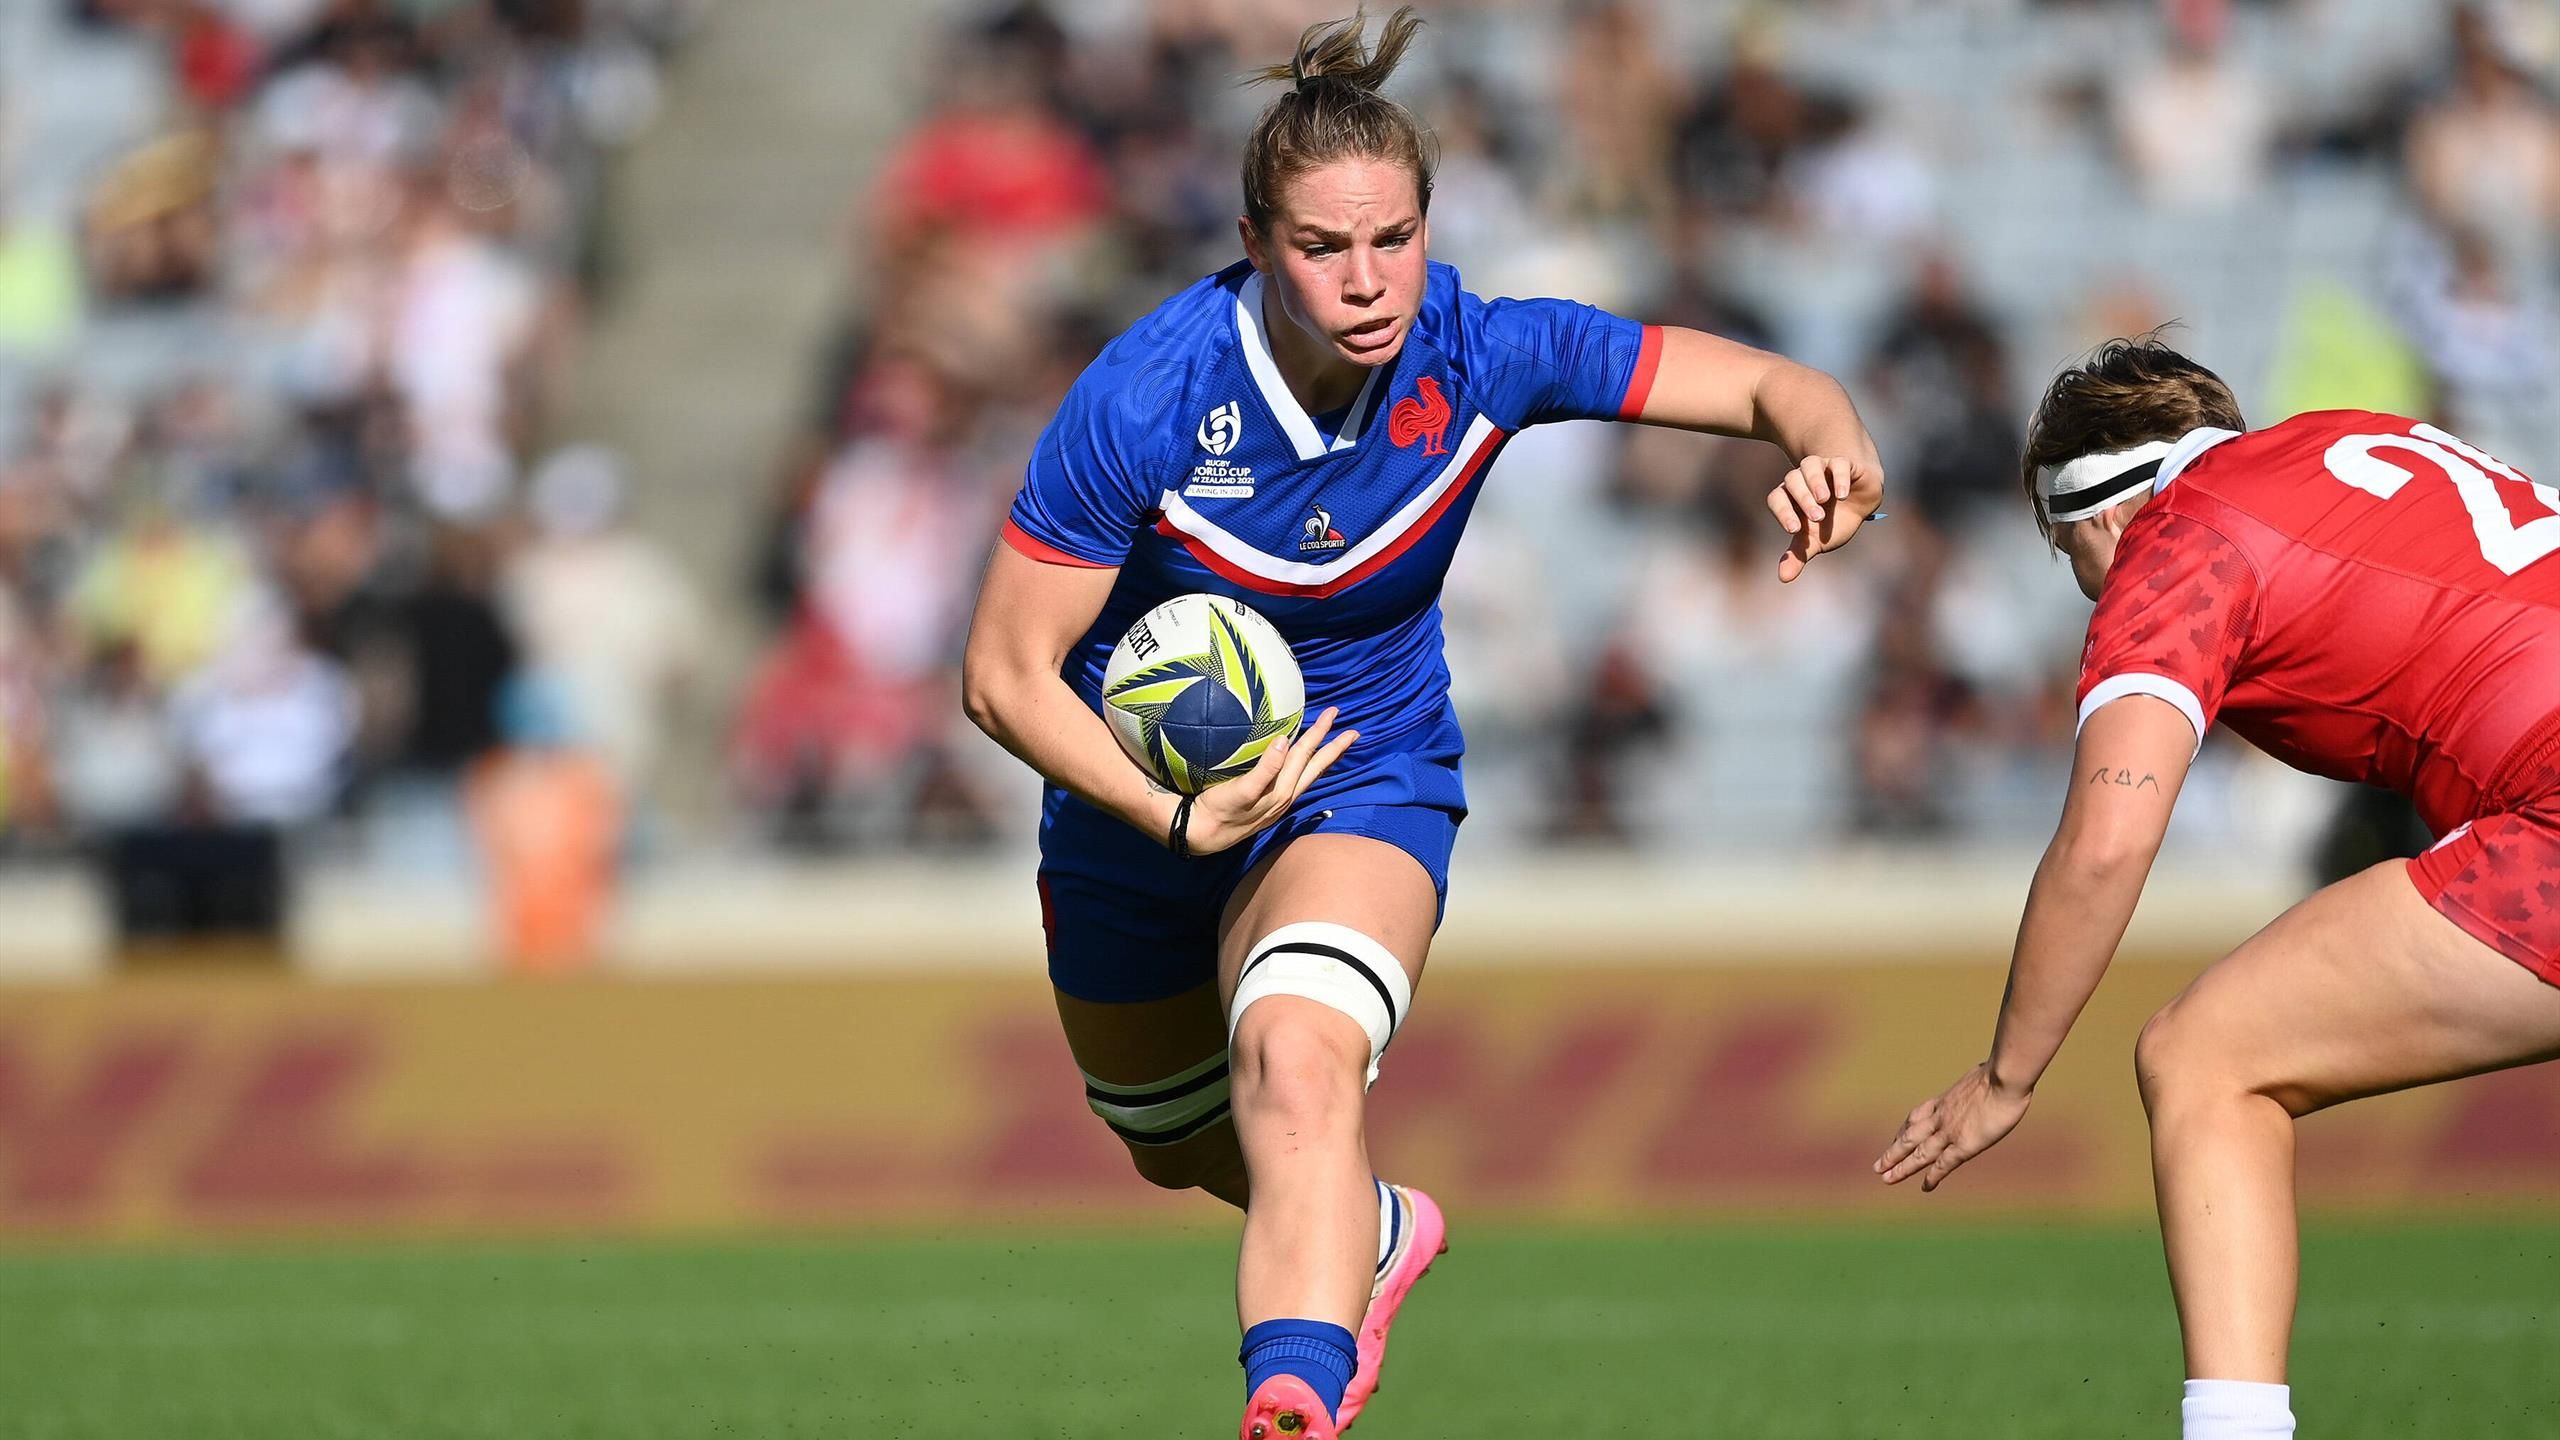 French XV Women’s Championship: Romain Menager withdraws from the WXV Championship in New Zealand